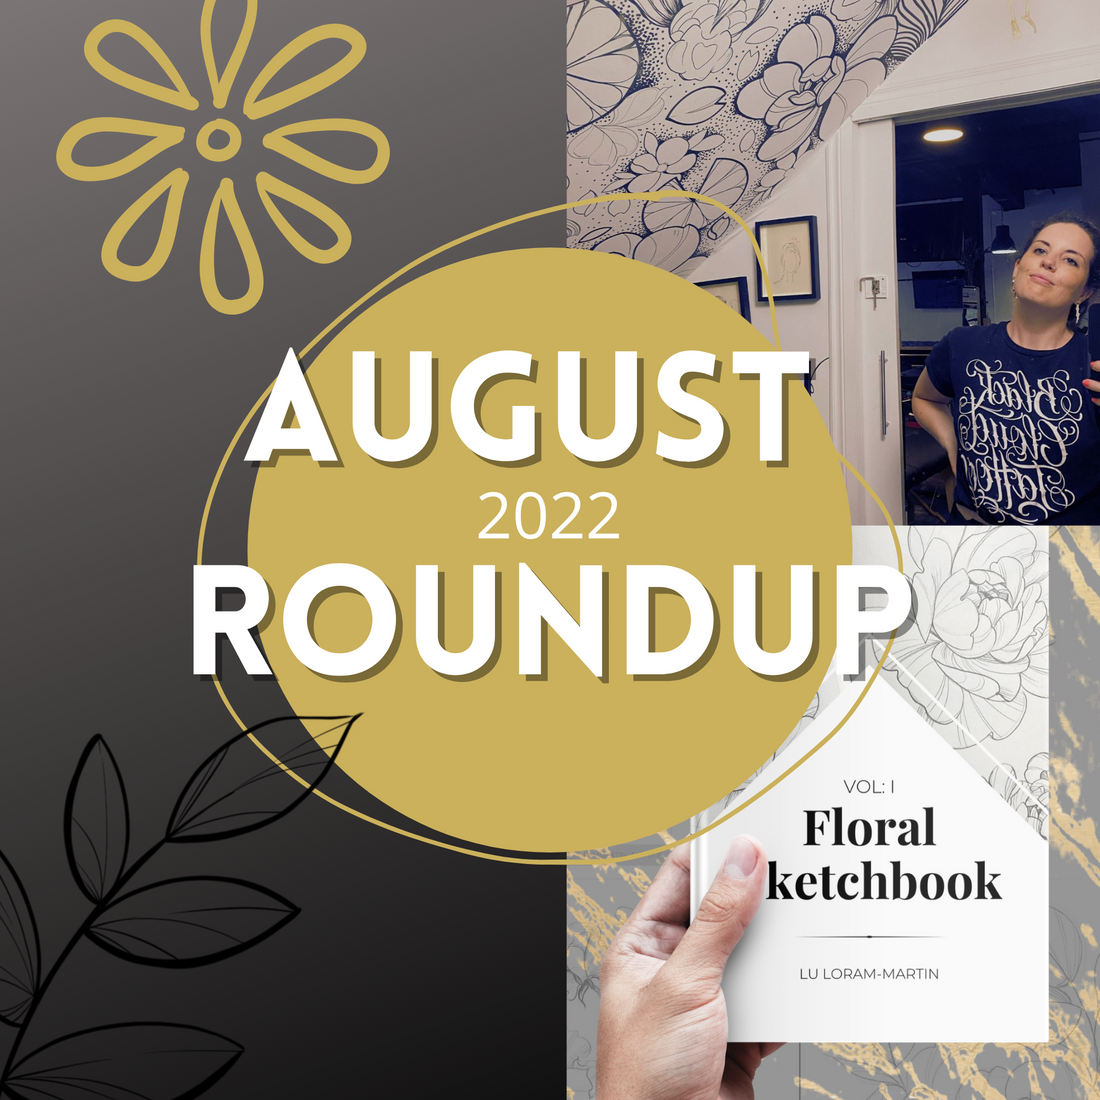 August 2022 Roundup by floral tattoo artist Lu Loram Martin, in Toronto, Canada.